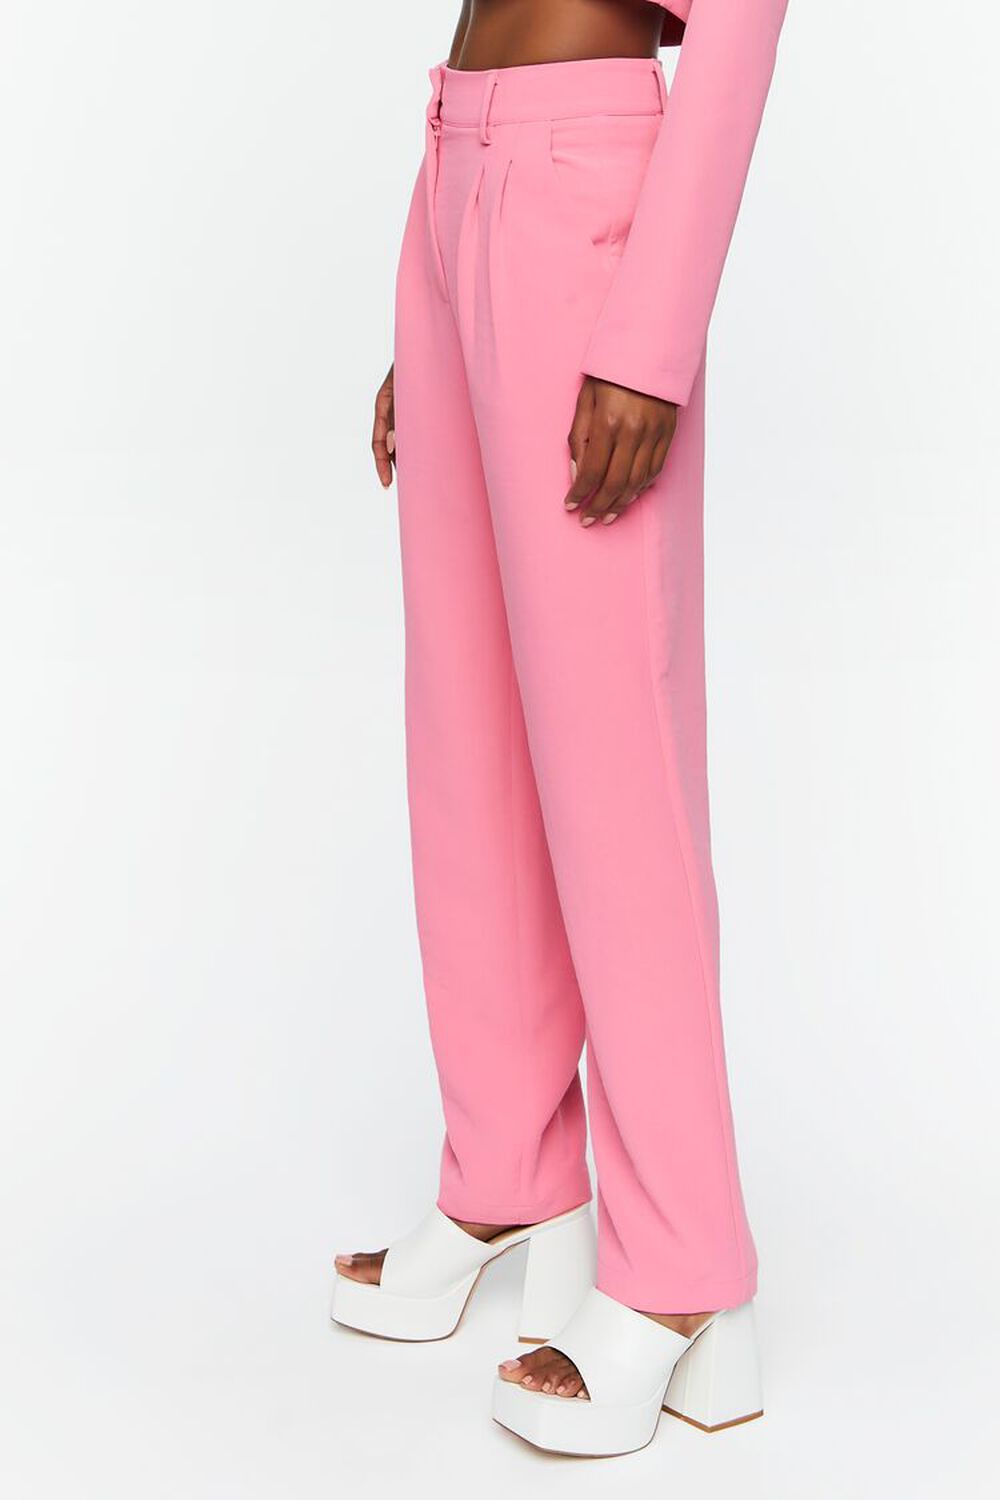 PEONY Wide-Leg Mid-Rise Trousers, image 3